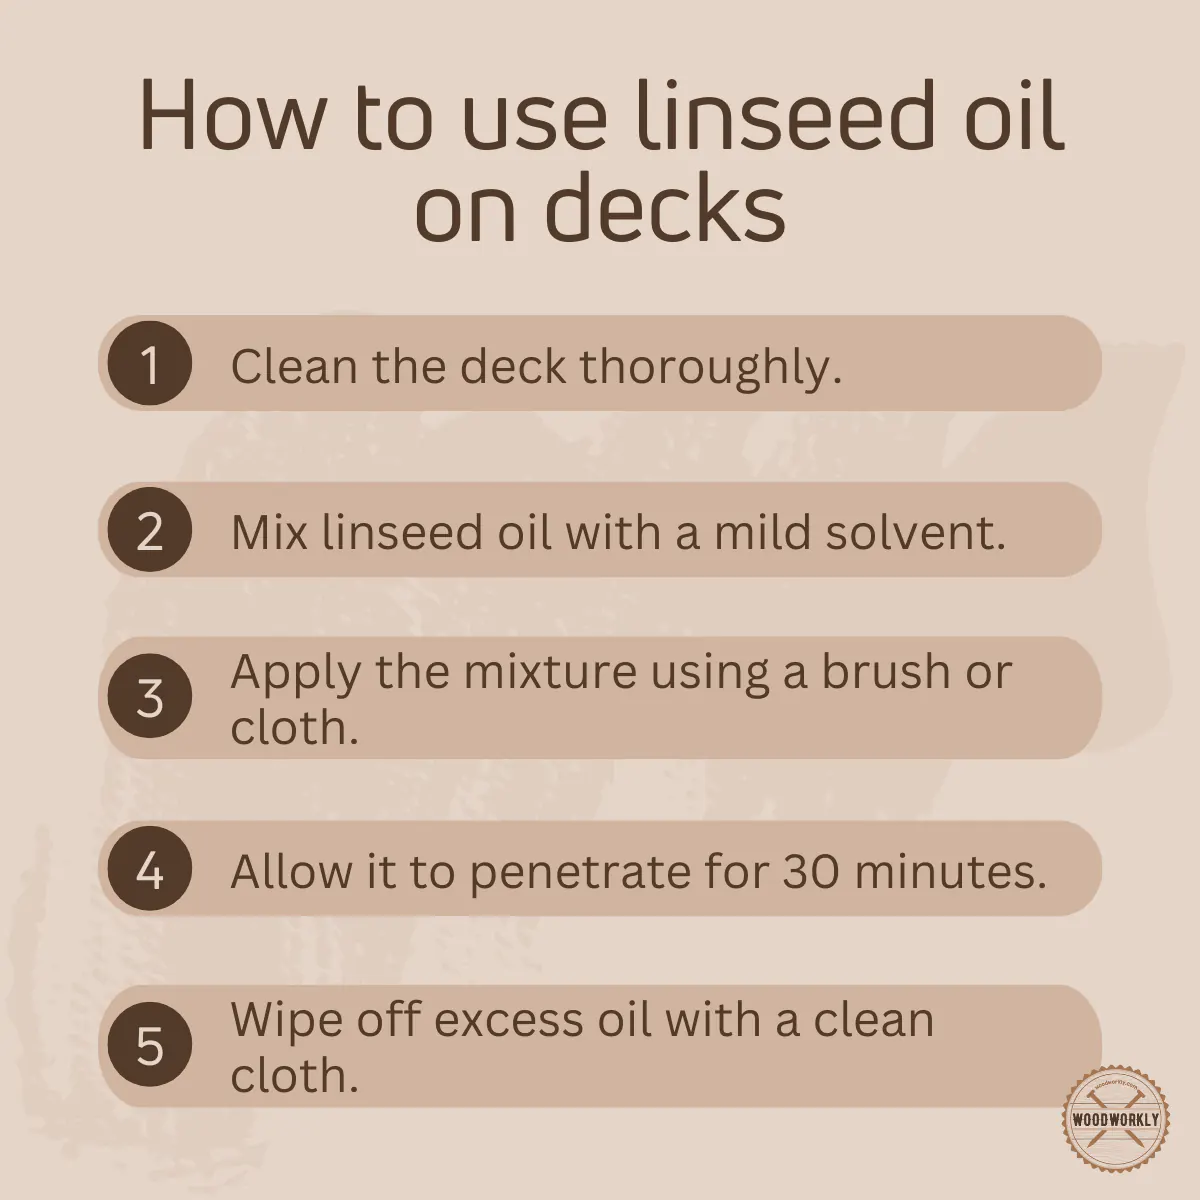 How to use linseed oil on decks